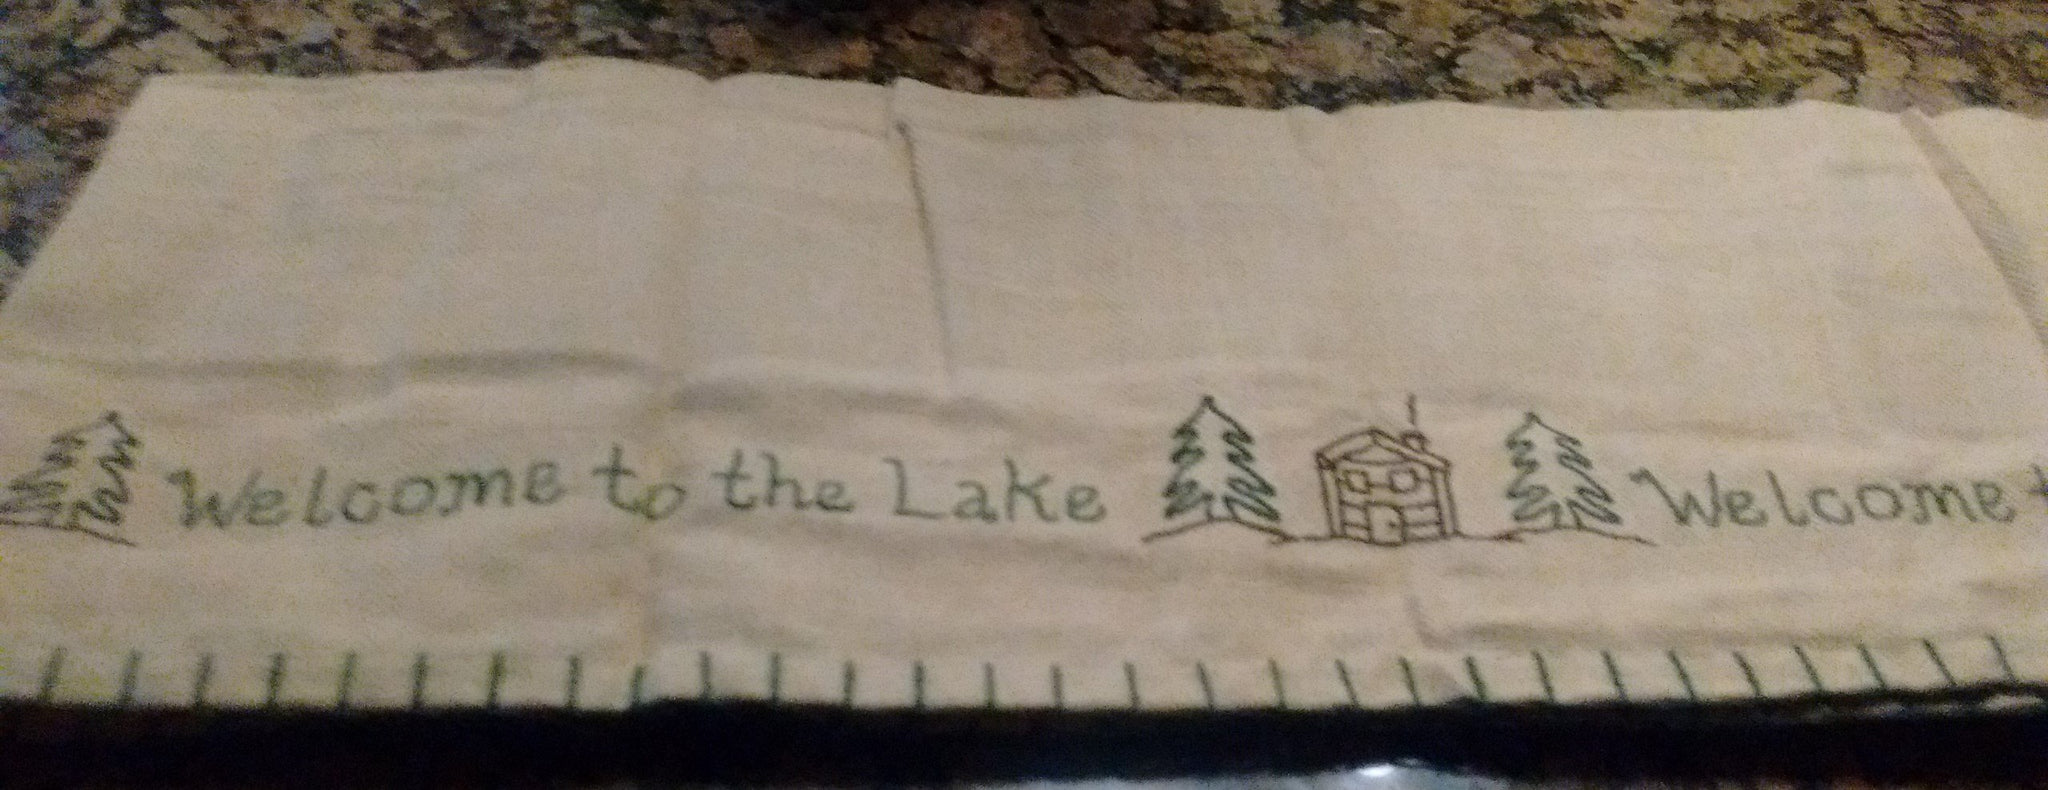 Park Designs - Welcome to the Lake Appliqued Lined Valances 60 x 14 Inches - Olde Church Emporium